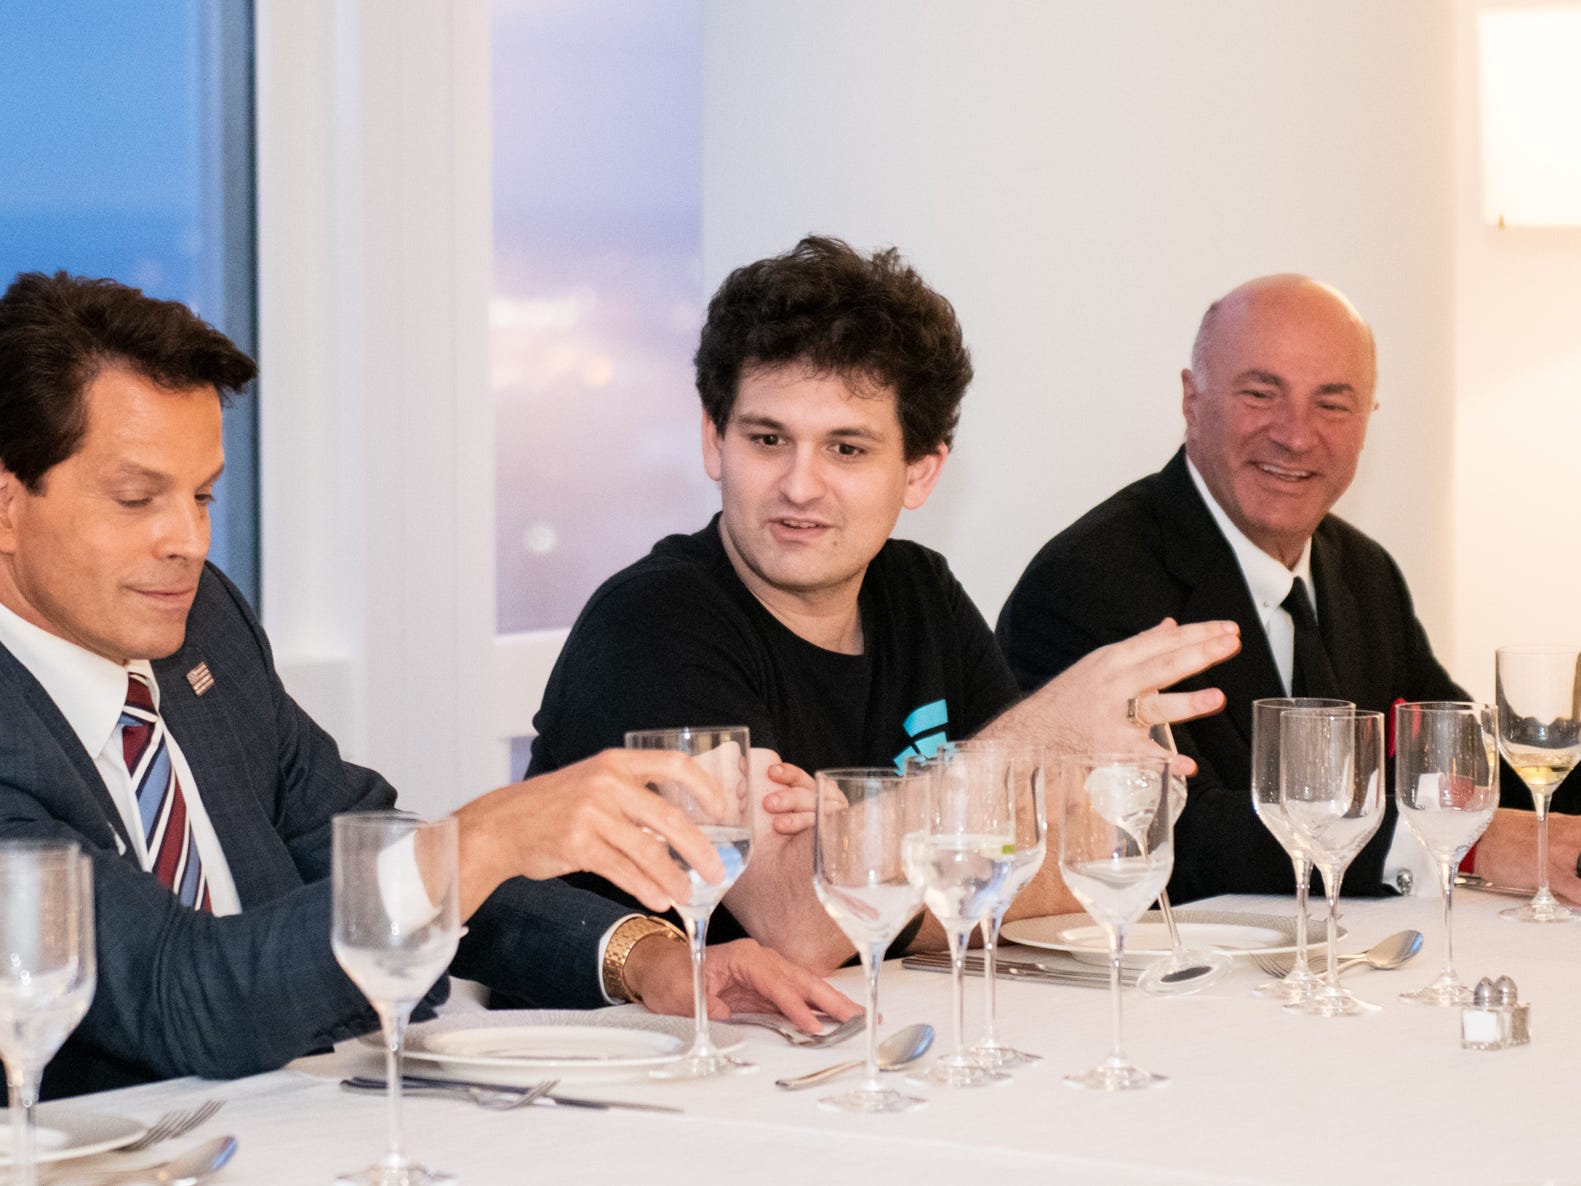 Sam Bankman-Fried is shown sitting at a long white table having dinner with Anthony Scaramucci  and Shark Tank investor Kevin O'Leary.